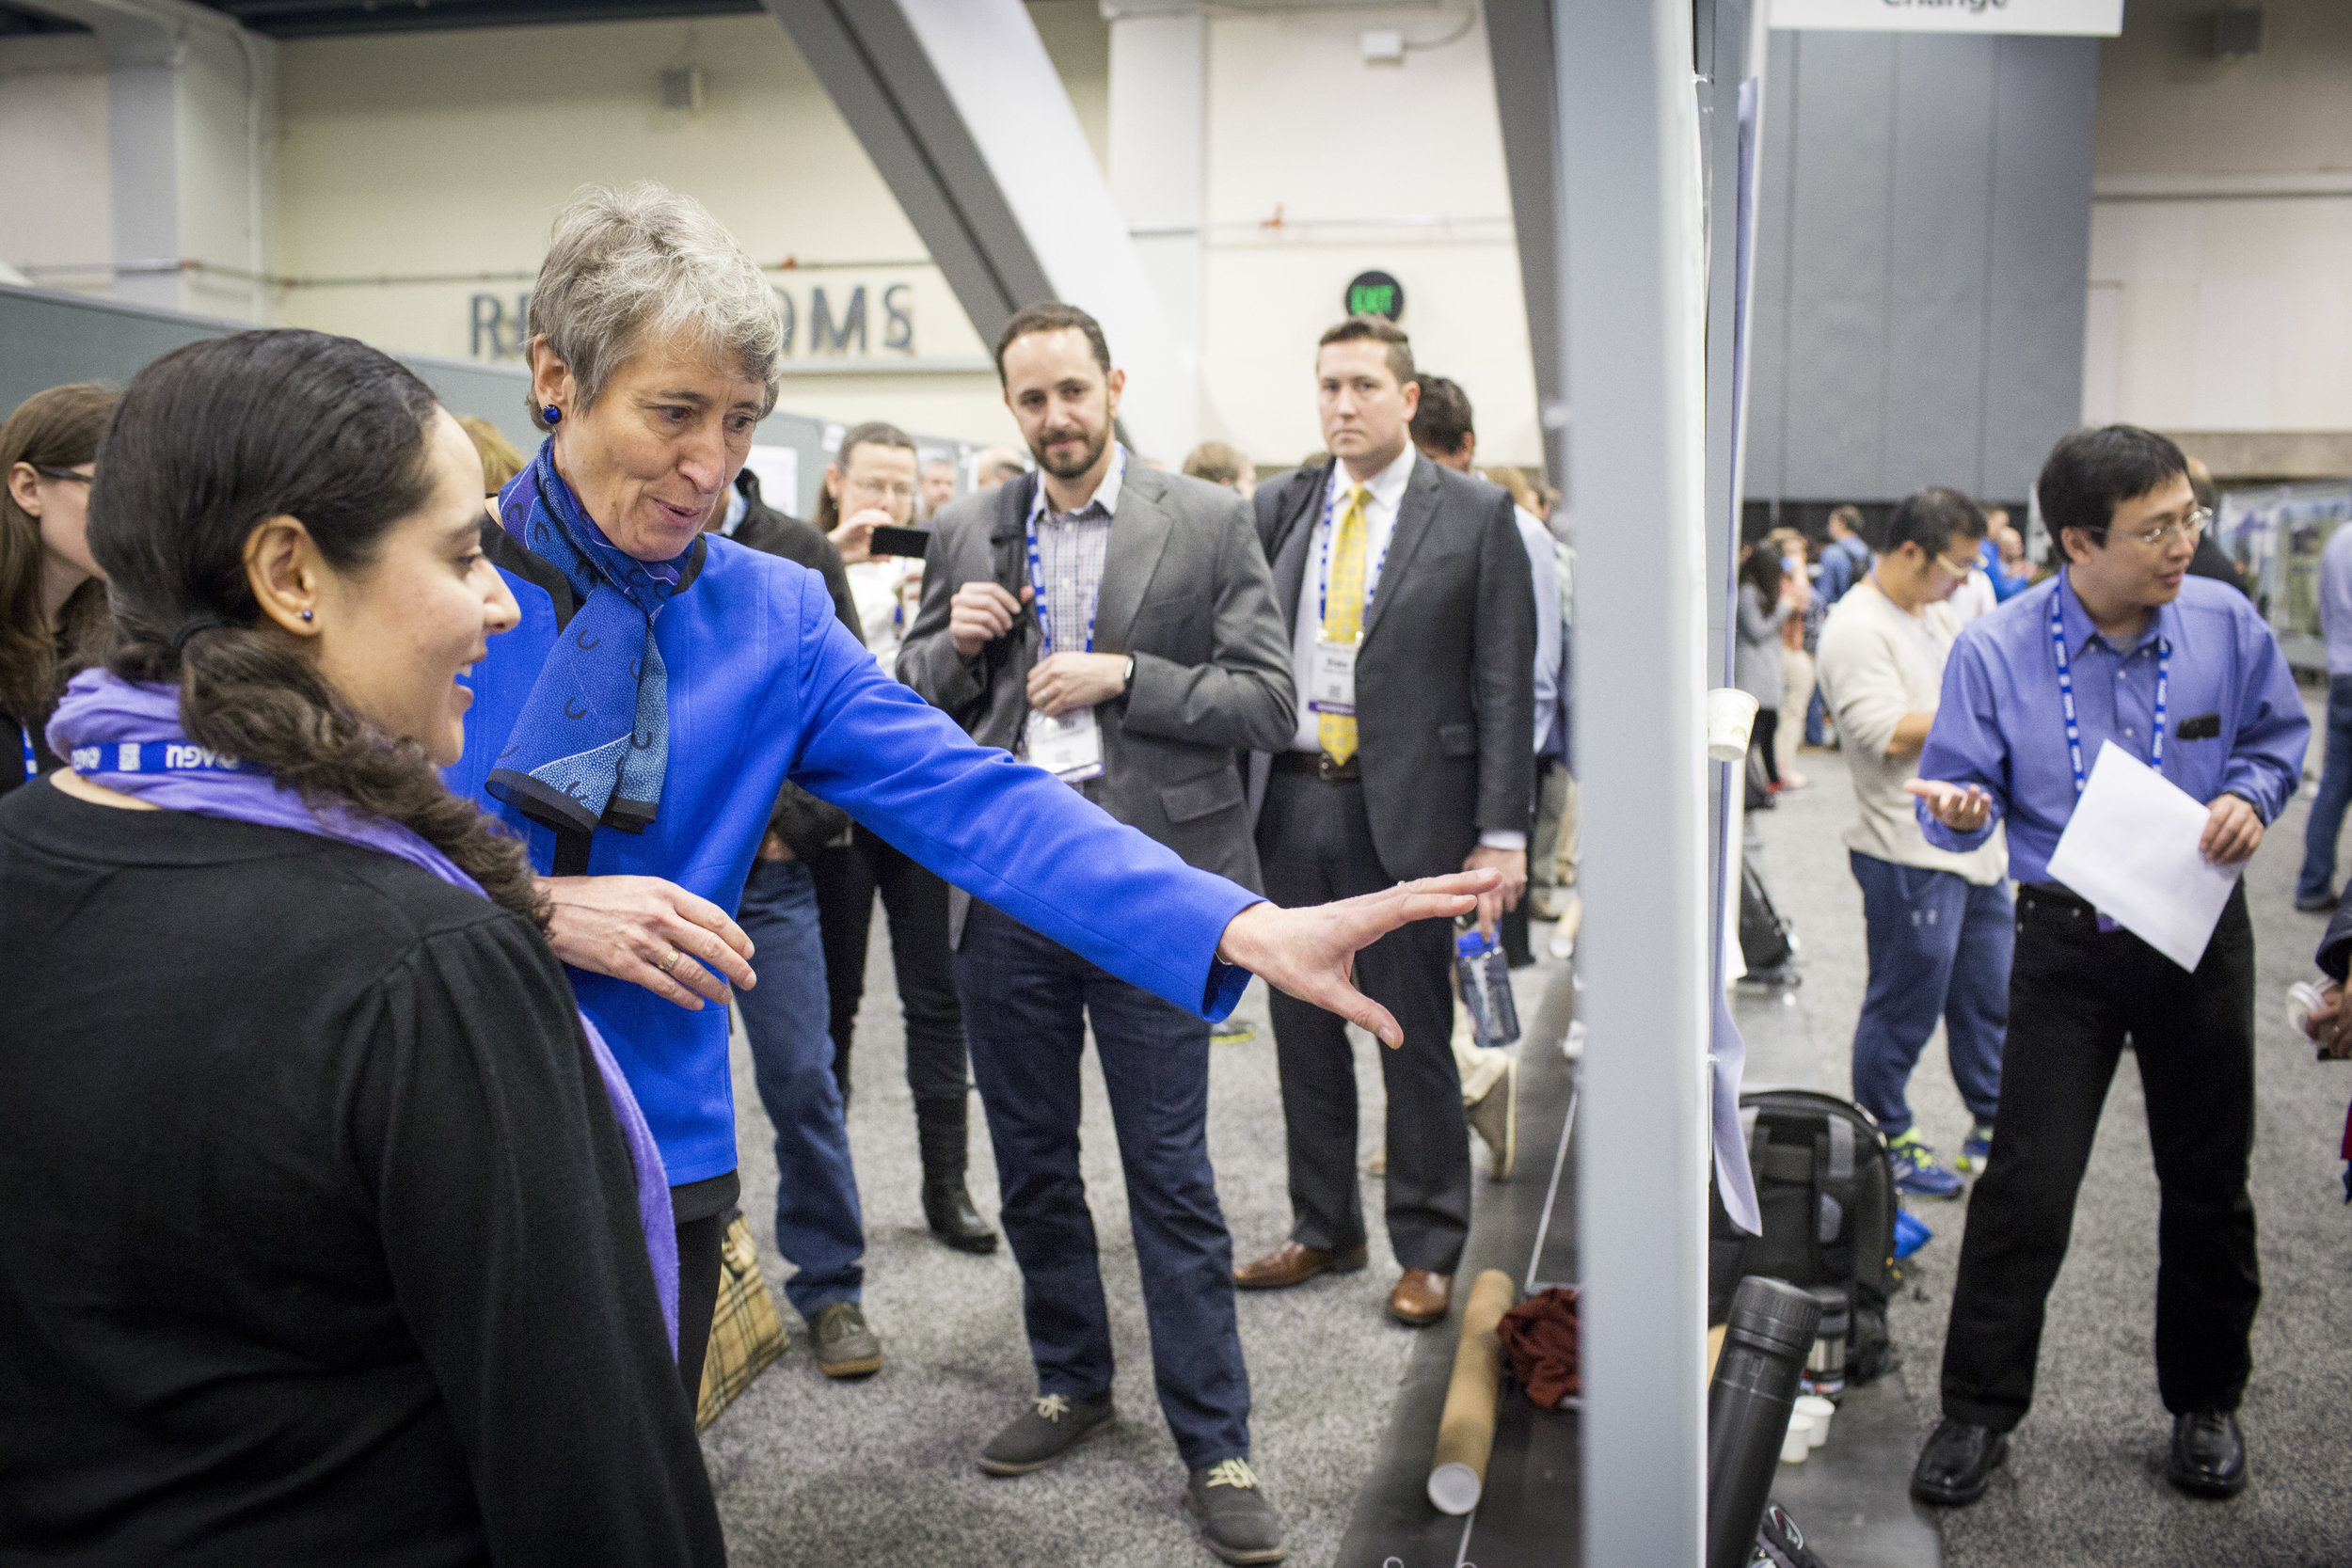  Secretary of the Interior Sally Jewell speaks with Dr. Cericia Martinez, research geophysicist with the USGS, Wednesday, Dec. 14, 2016 in San Francisco, CA at the American Geophysical Union's annual fall meeting. Martinez's report is titled "Quantif